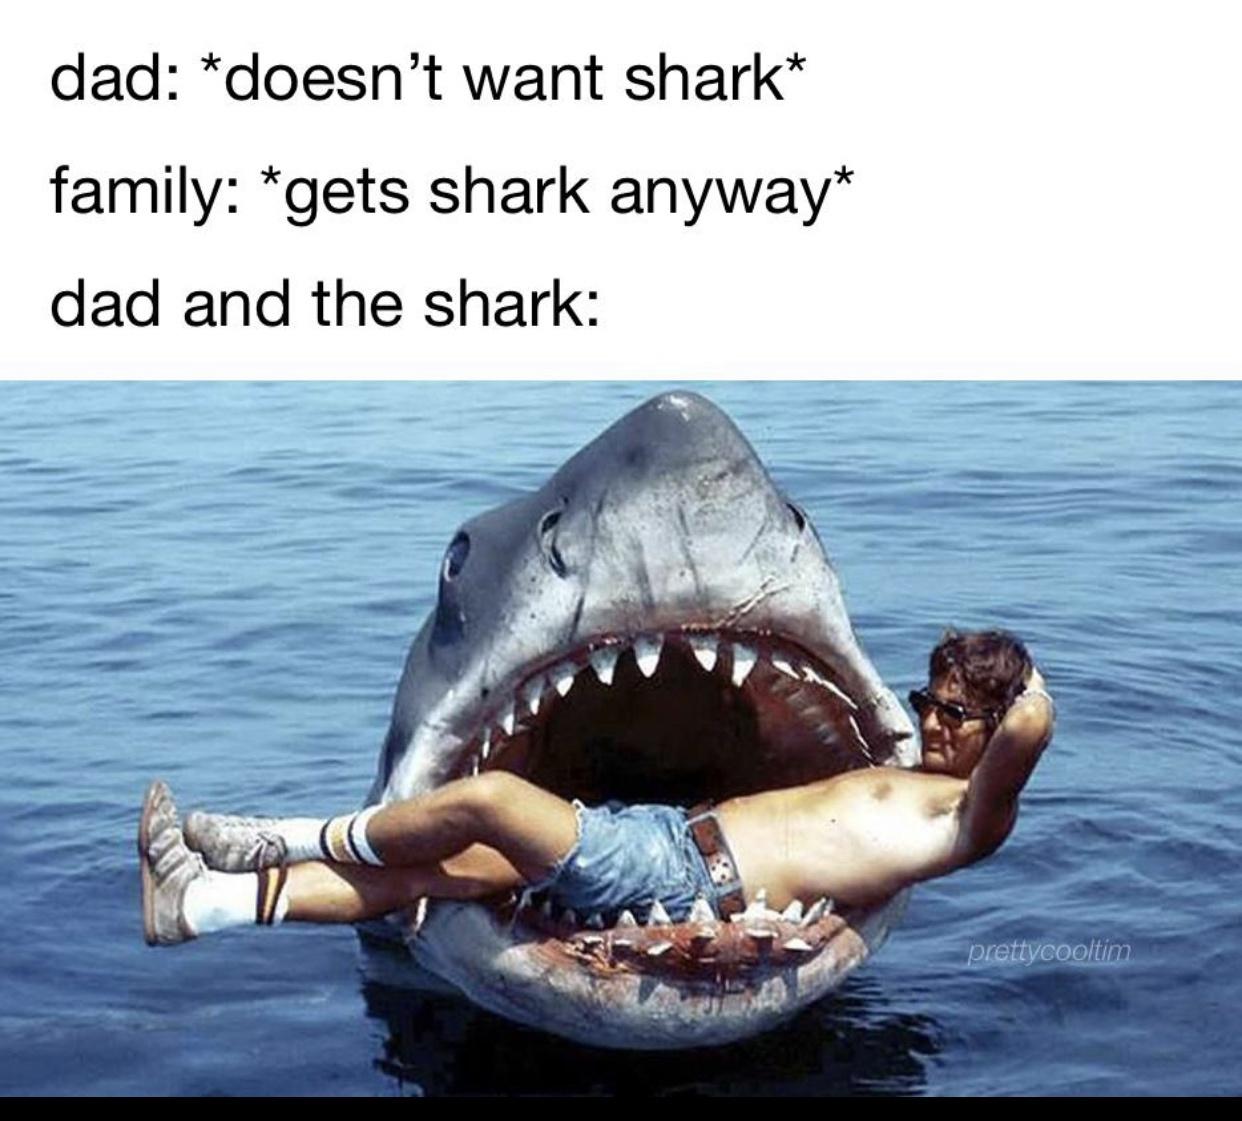 steven spielberg jaws - dad doesn't want shark family gets shark anyway dad and the shark prettycooltim